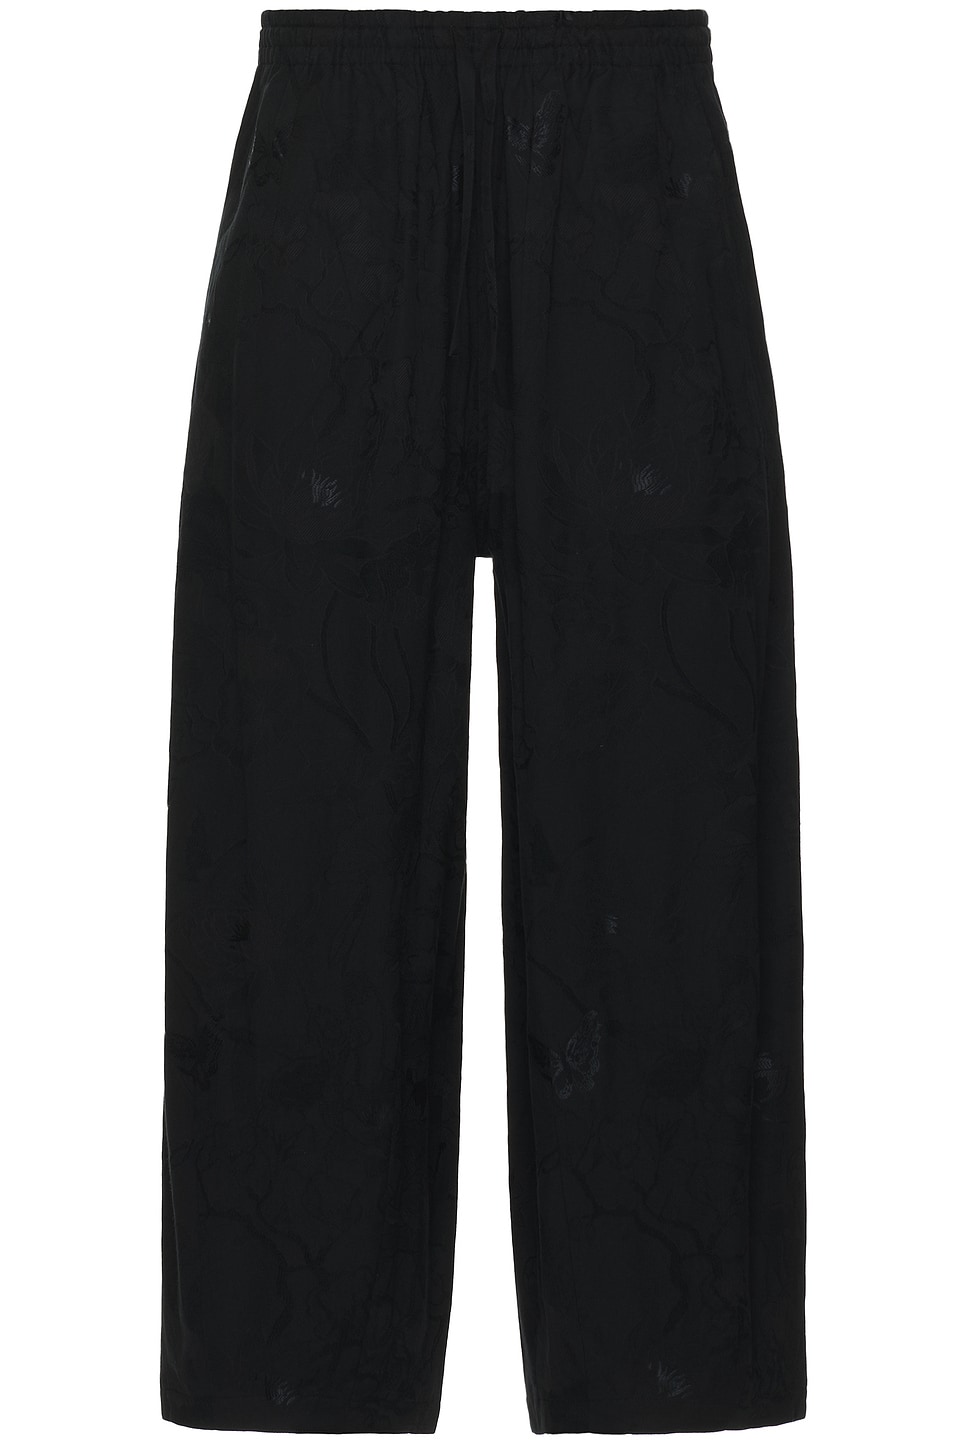 Image 1 of Needles H.D.P. Pant Papillon In Black in Black